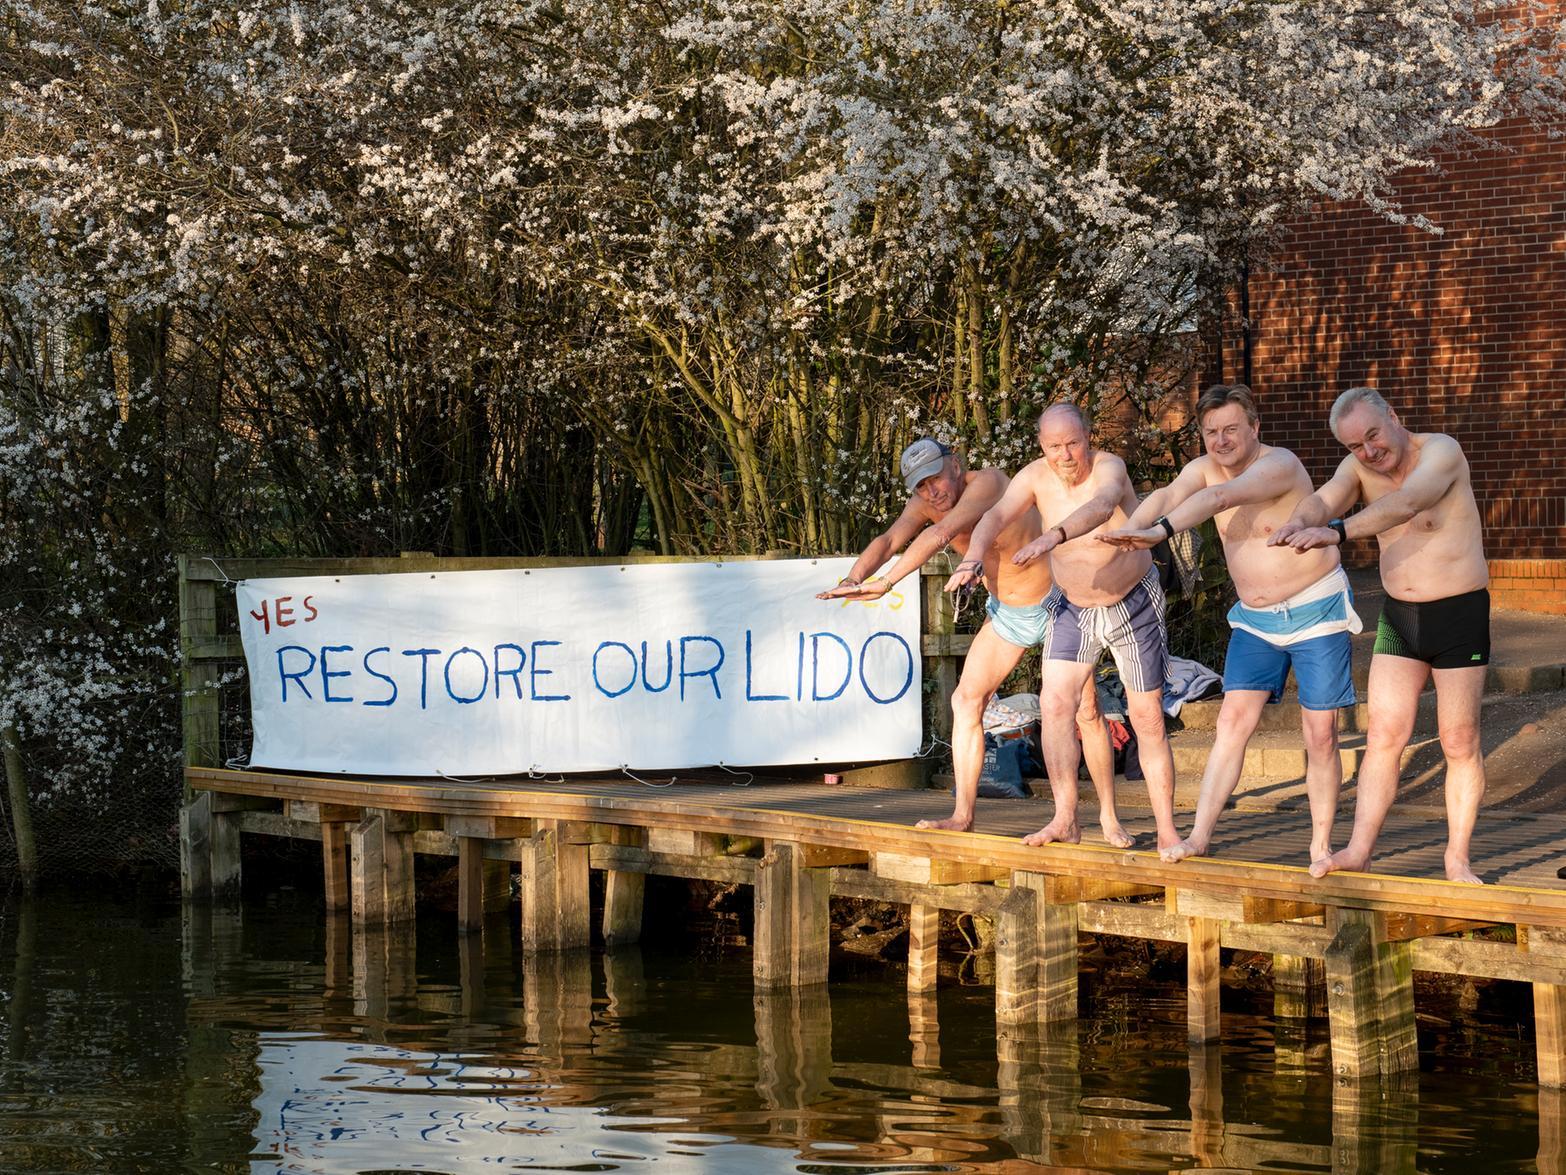 It is not often you see four men ready for a February swim in the Abbey Fields lake.
But there was a good reason for it - these campaigners fighting against plans to close the outdoor pool were responding to a comment made by a councillor who said: "If you want outdoor swimming, then go and swim in the lake."
None of the men pictured actually jumped in - but one person who did take a dip was Lindsey Cole, who was the first person to swim
the length of the River Thames. She arrived in town a bit later to help with the campaign.